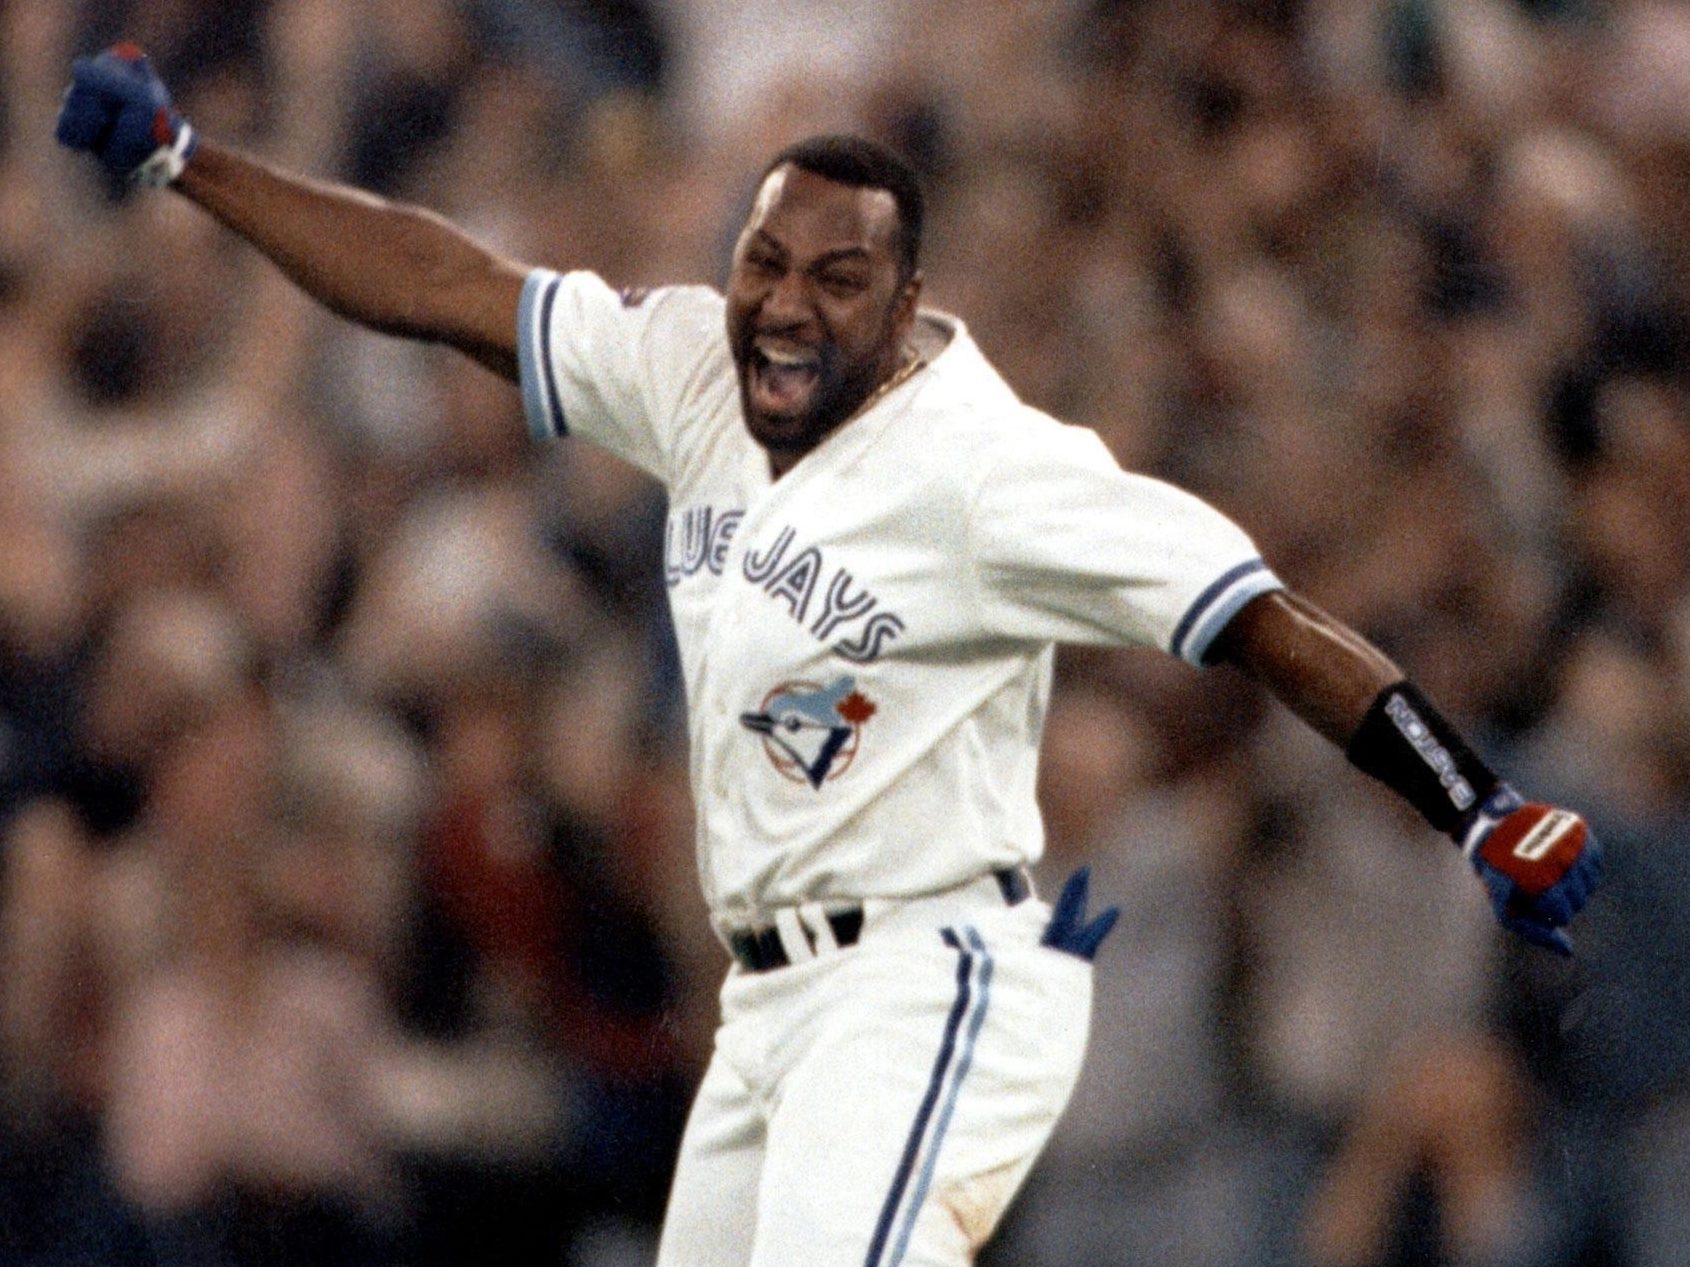 SIMMONS: The five biggest hits in Blue Jays history were all home